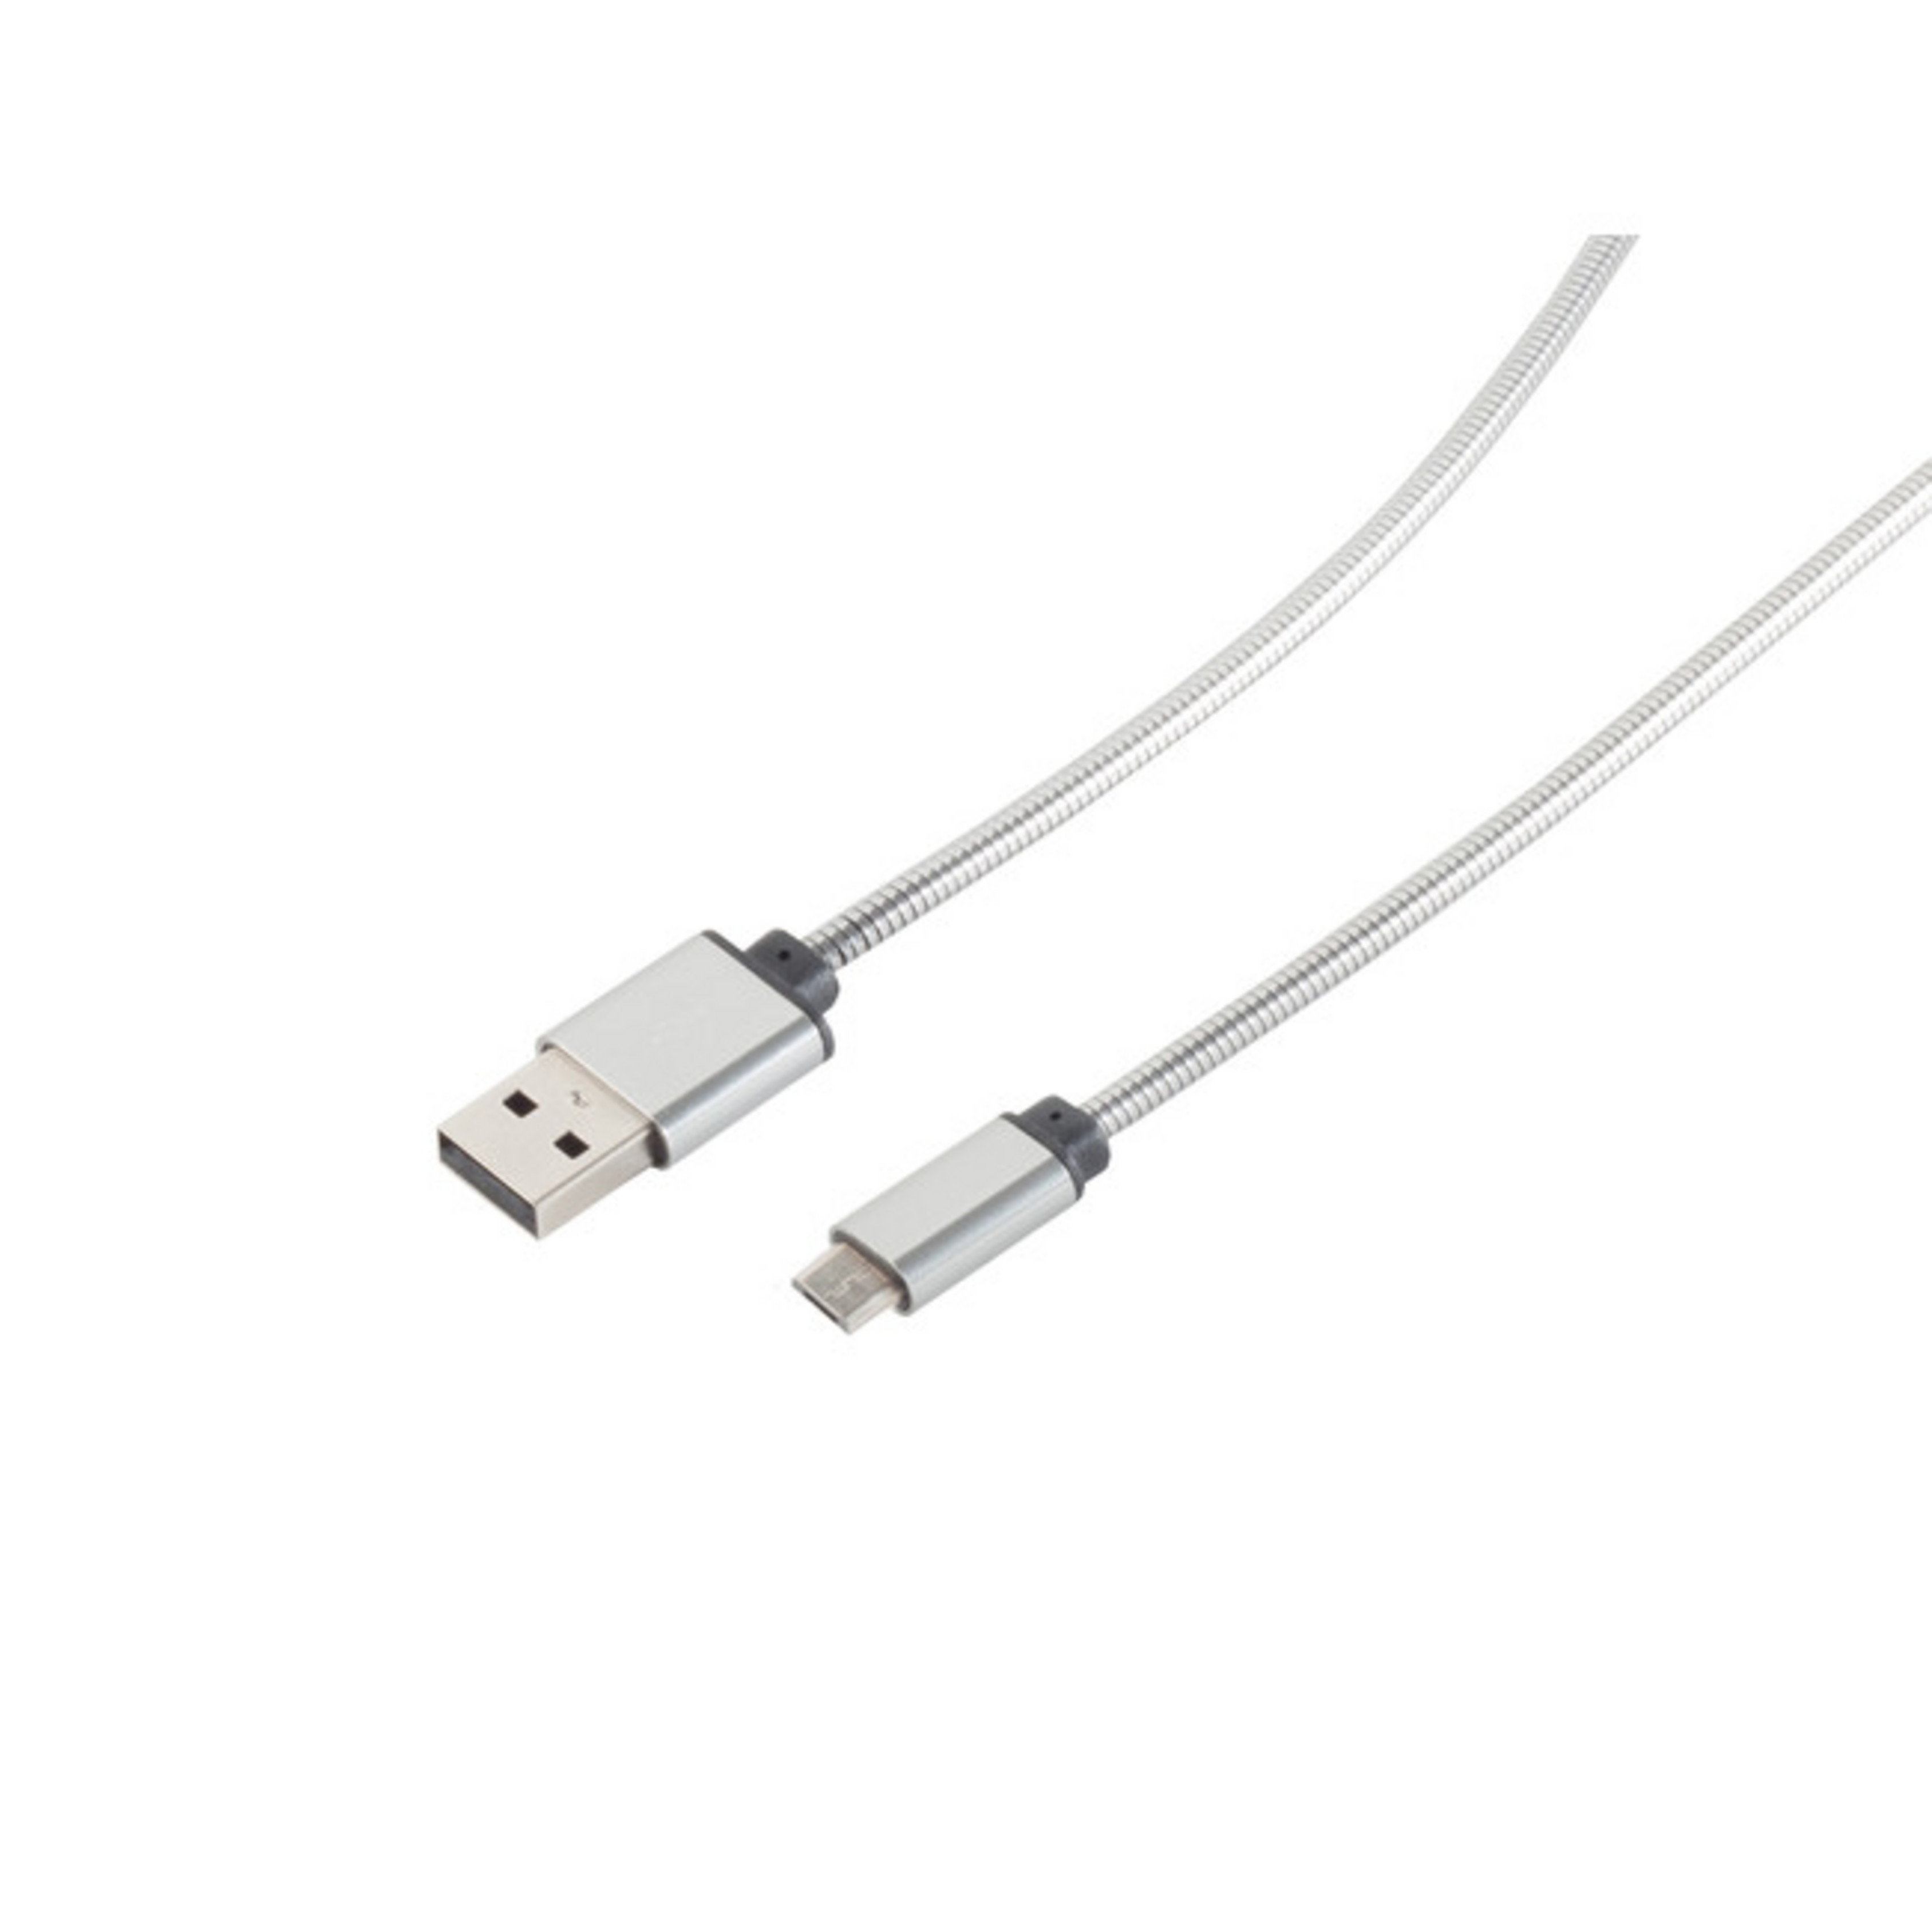 S/CONN MAXIMUM CONNECTIVITY USB Lade-Sync A/ USB Steel Silber micro, 1m USB Kabel Kabel